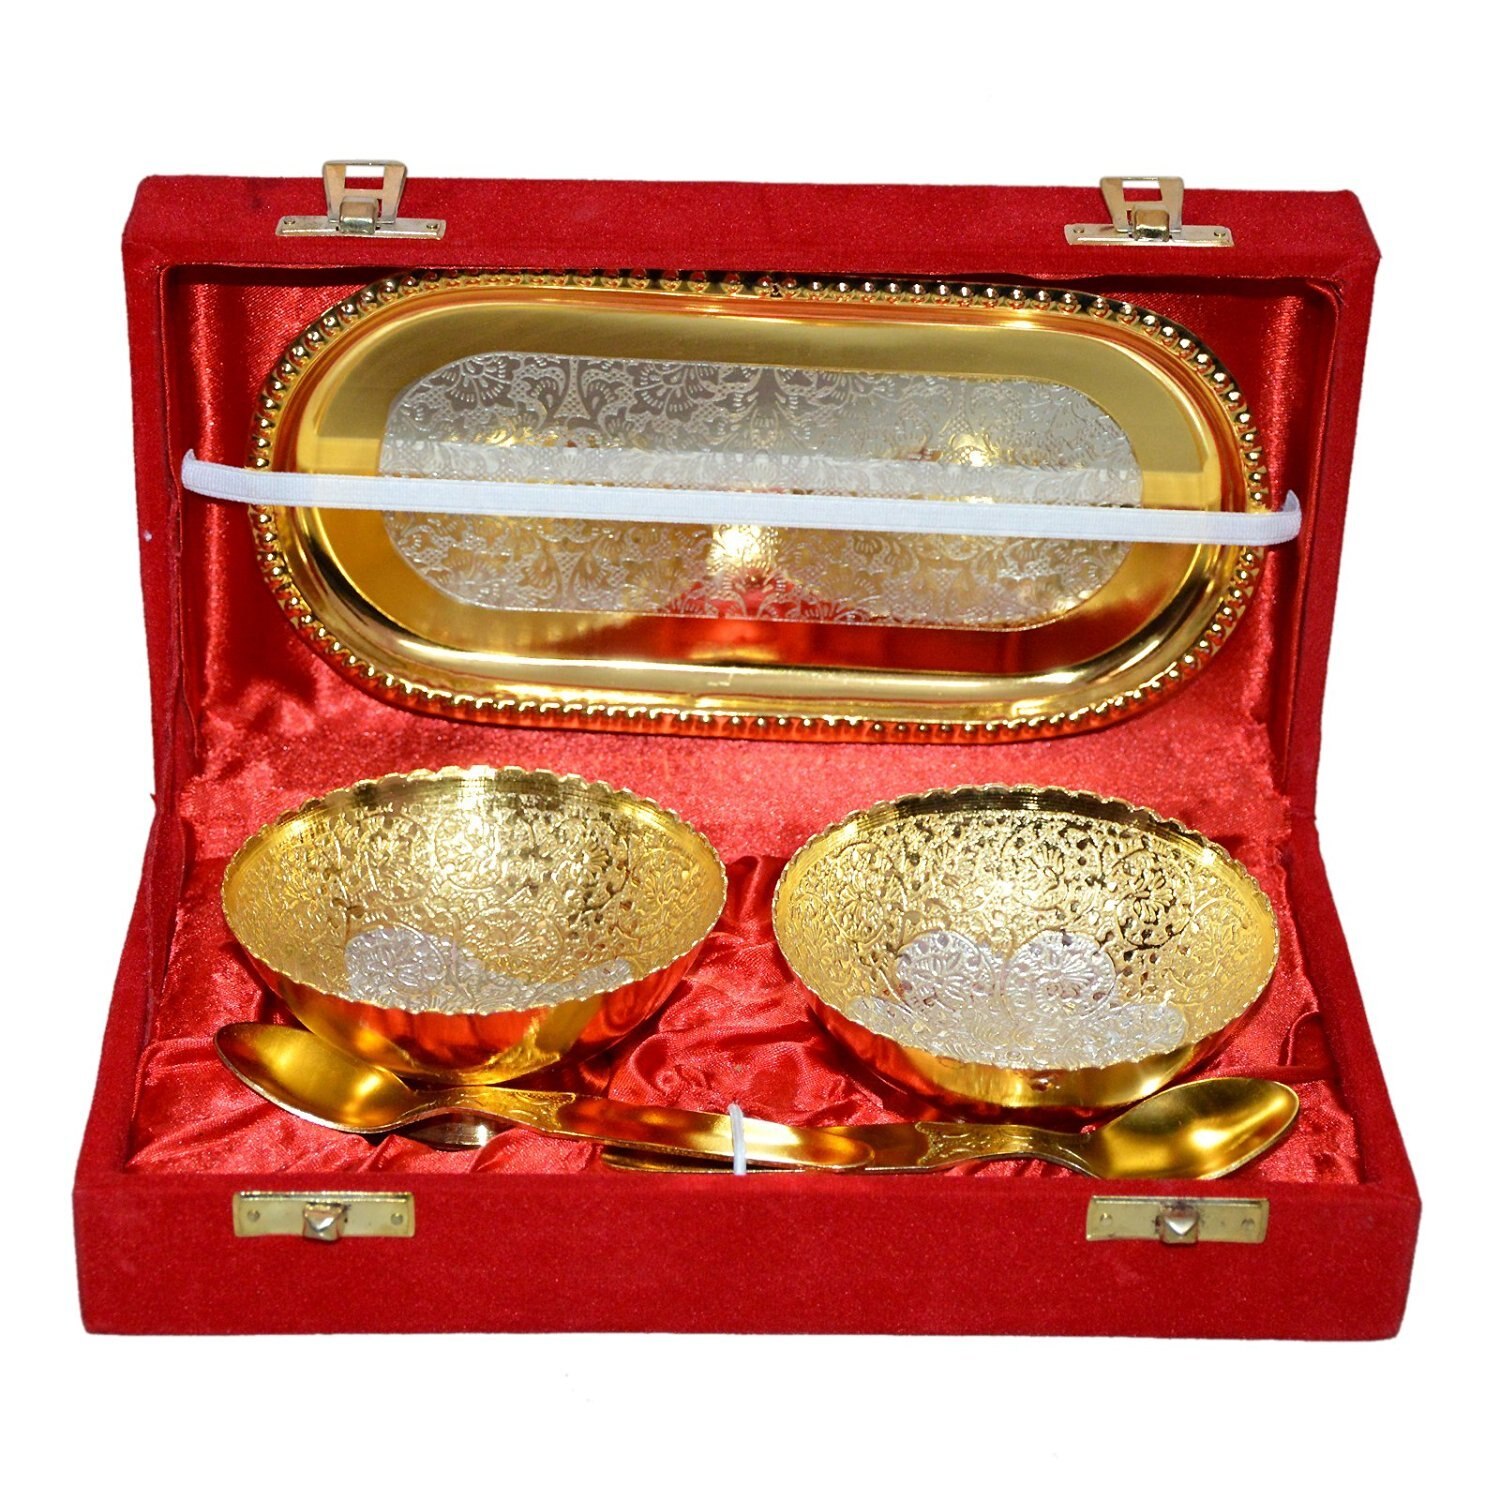 Amazon Festival Sale: Buy Beautiful Bowl Sets Under Rs.200 From Amazon For Special Dhanteras